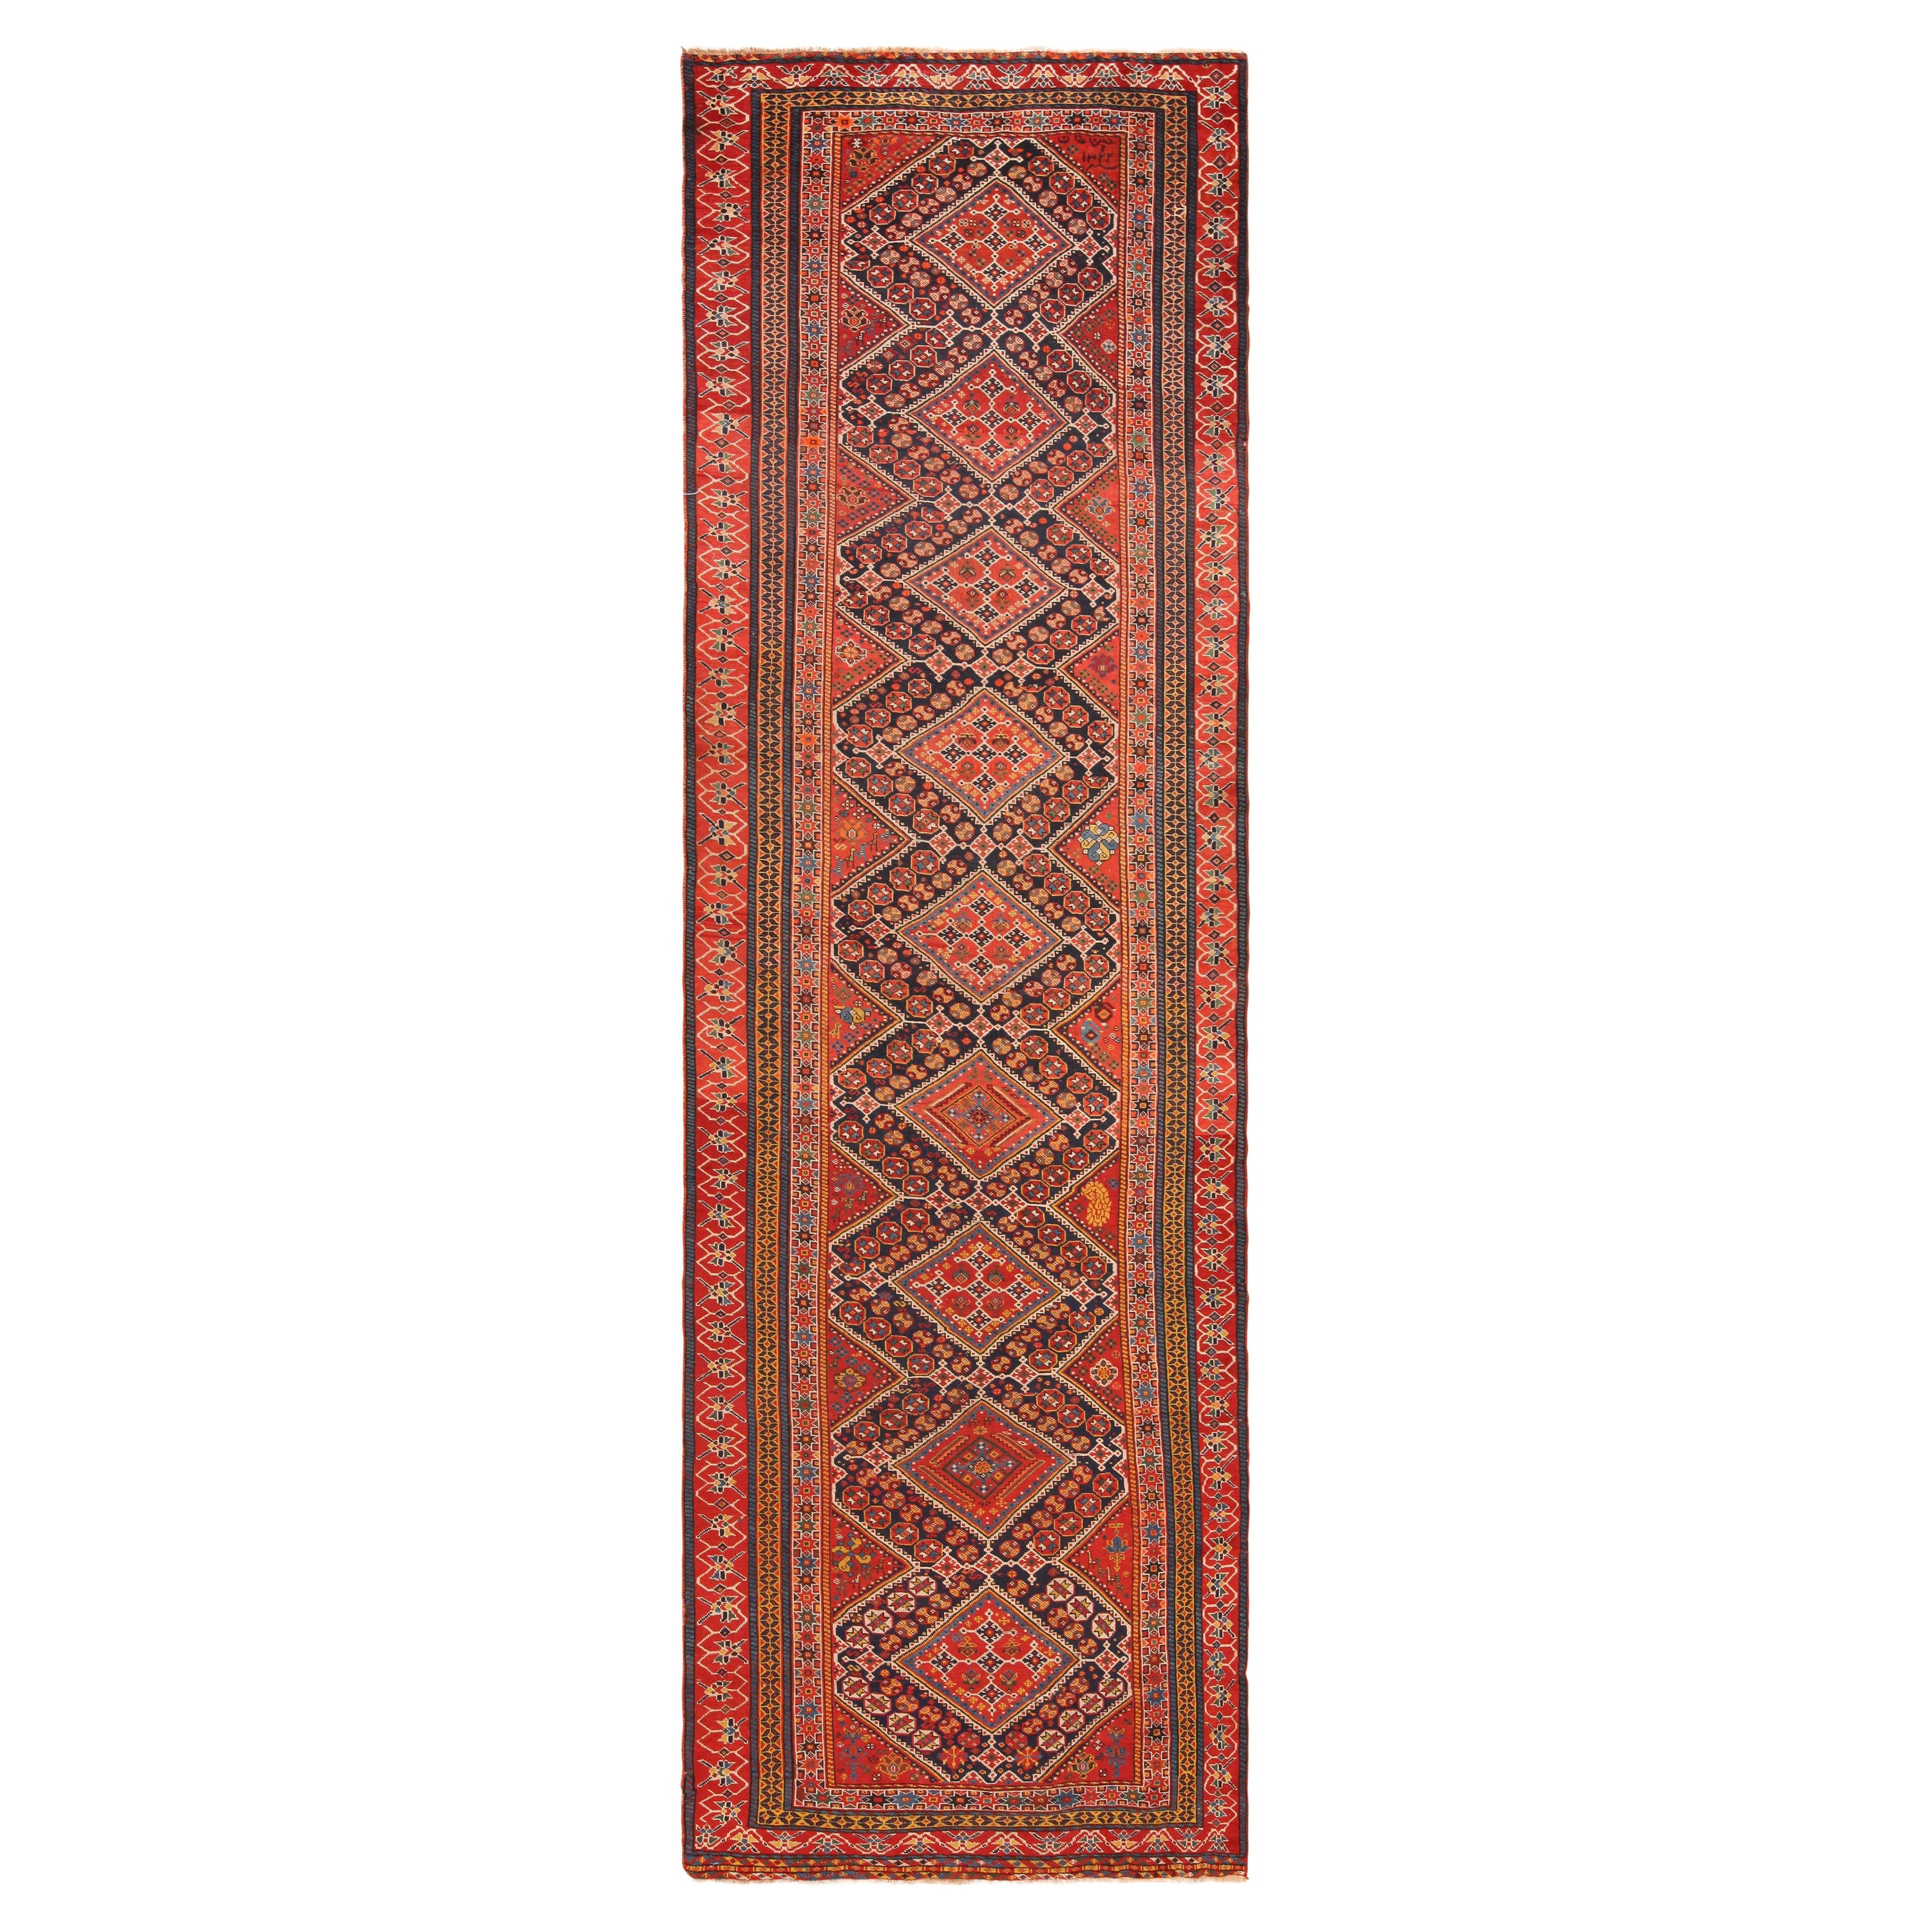 Antique Persian Qashqai Runner Rug. Size: 4 ft 1 in x 14 ft 3 in